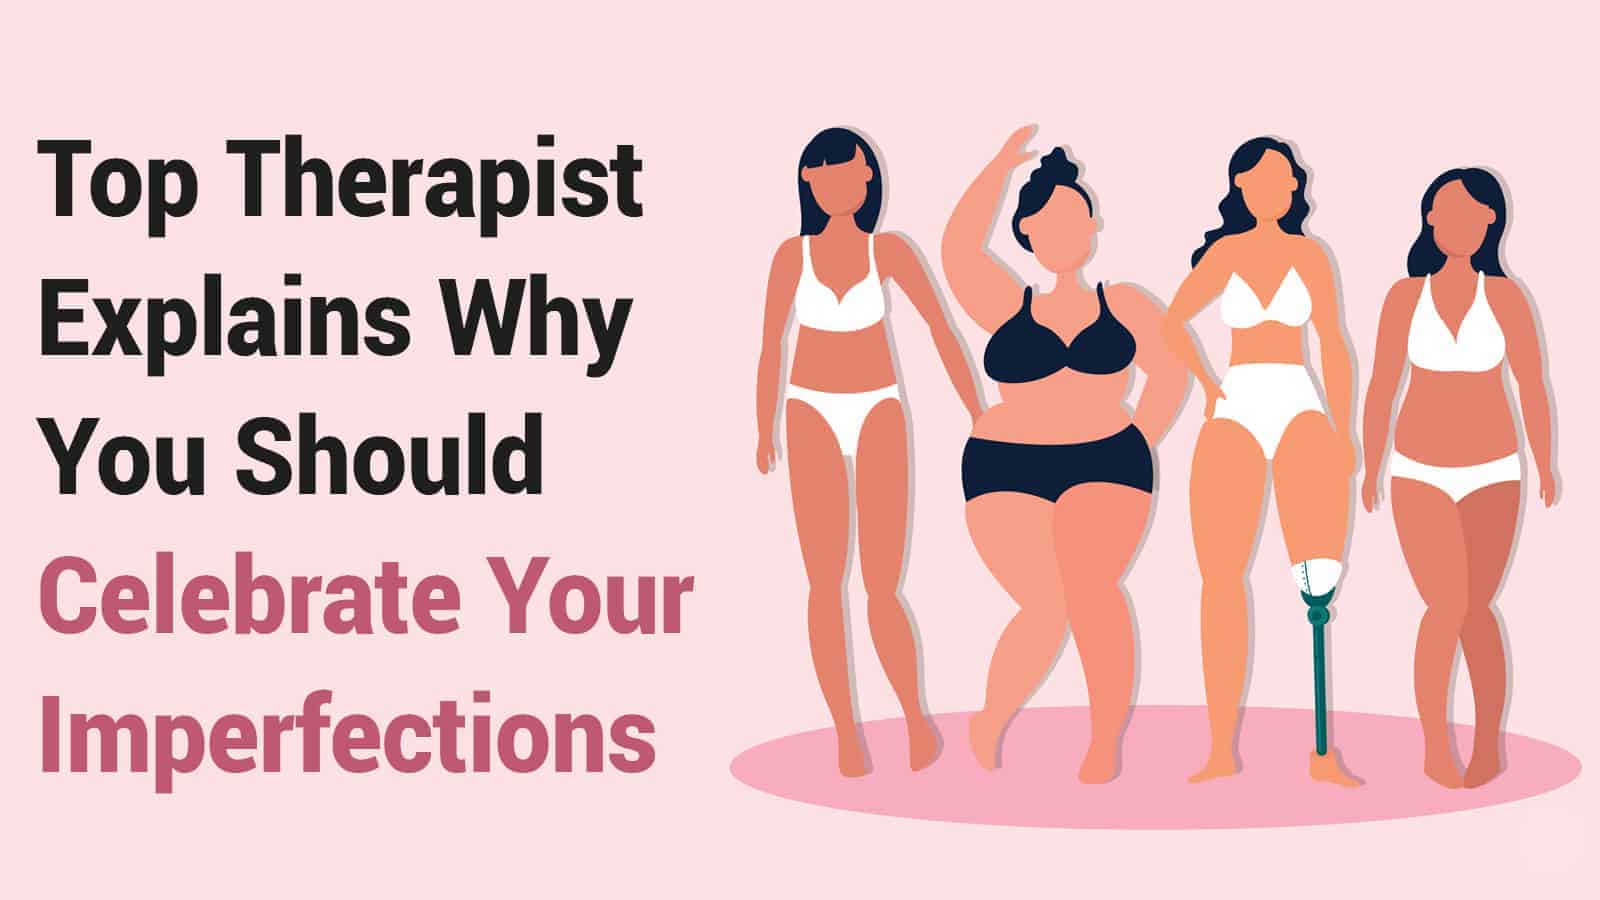 Top Therapist Explains Why You Should Celebrate Your Imperfections